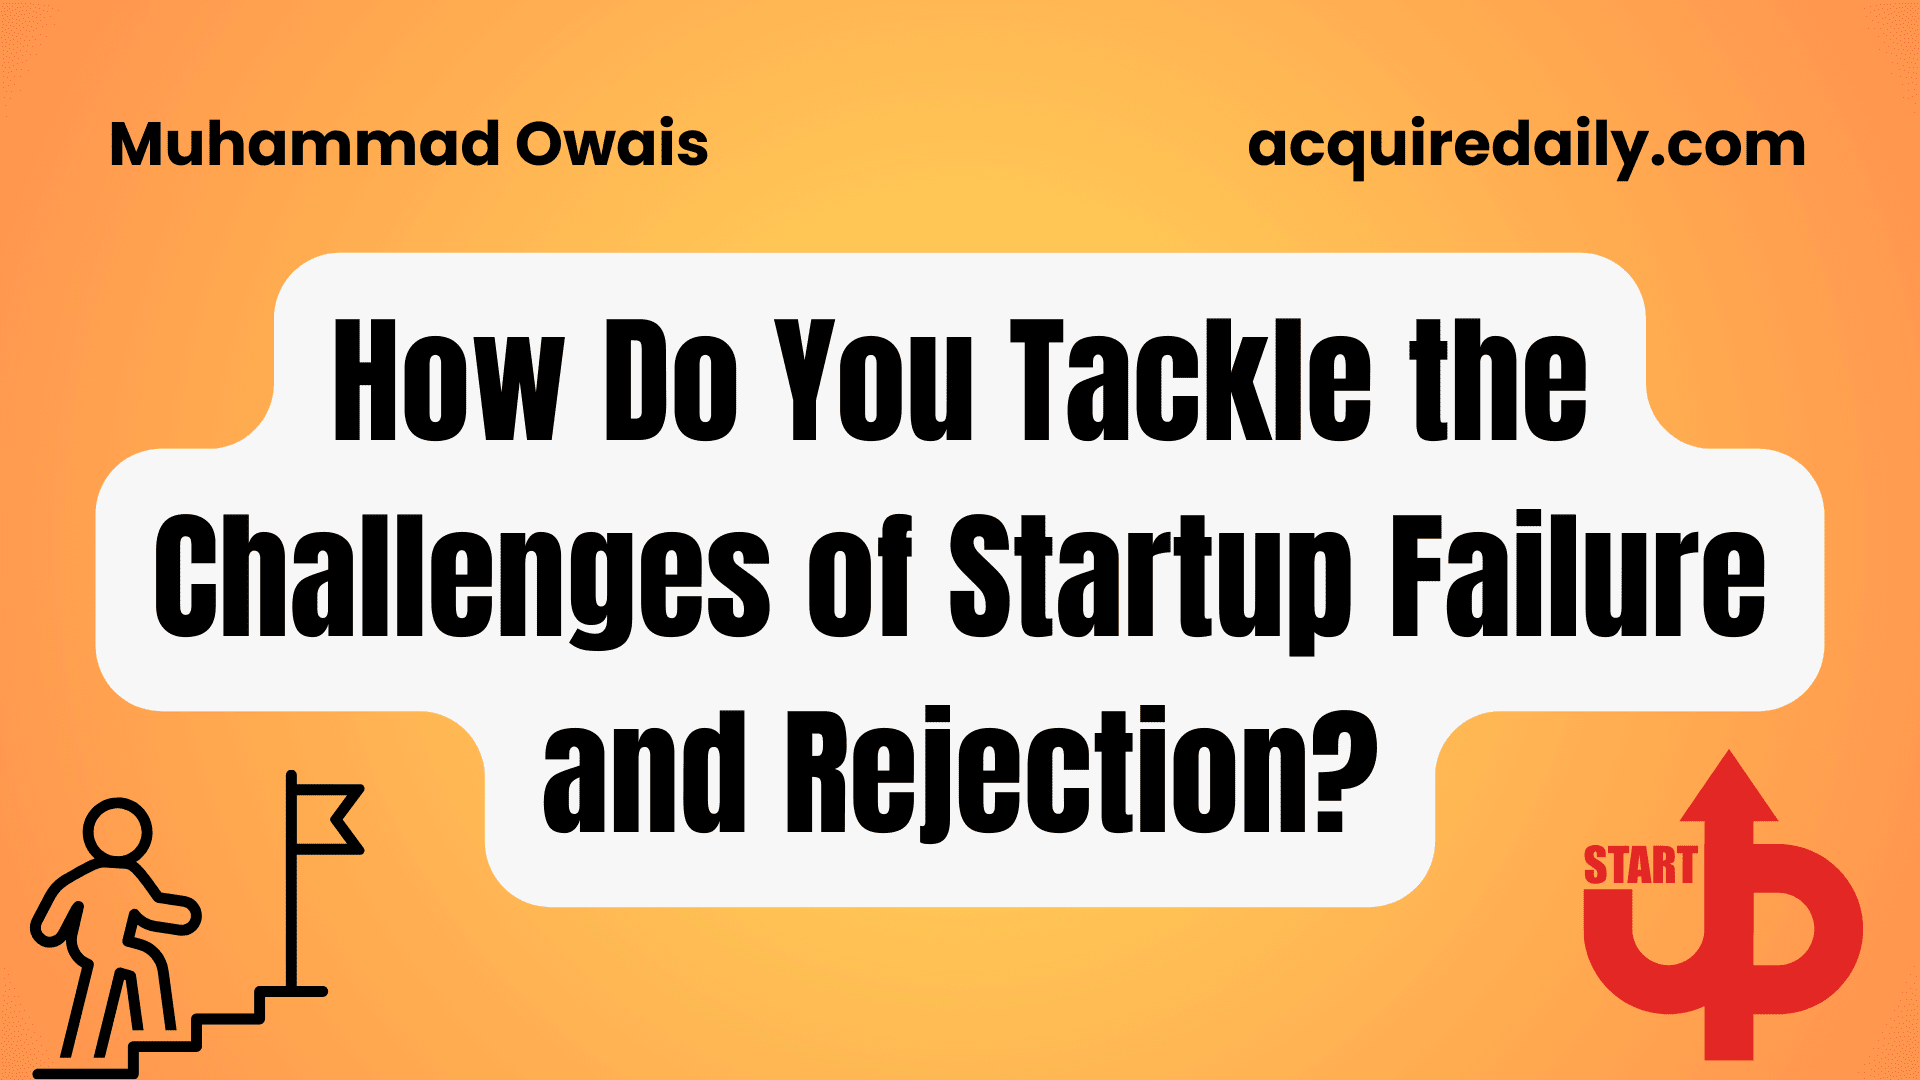 How Do You Tackle the Challenges of Startup Failure and Rejection? - Acquire Daily